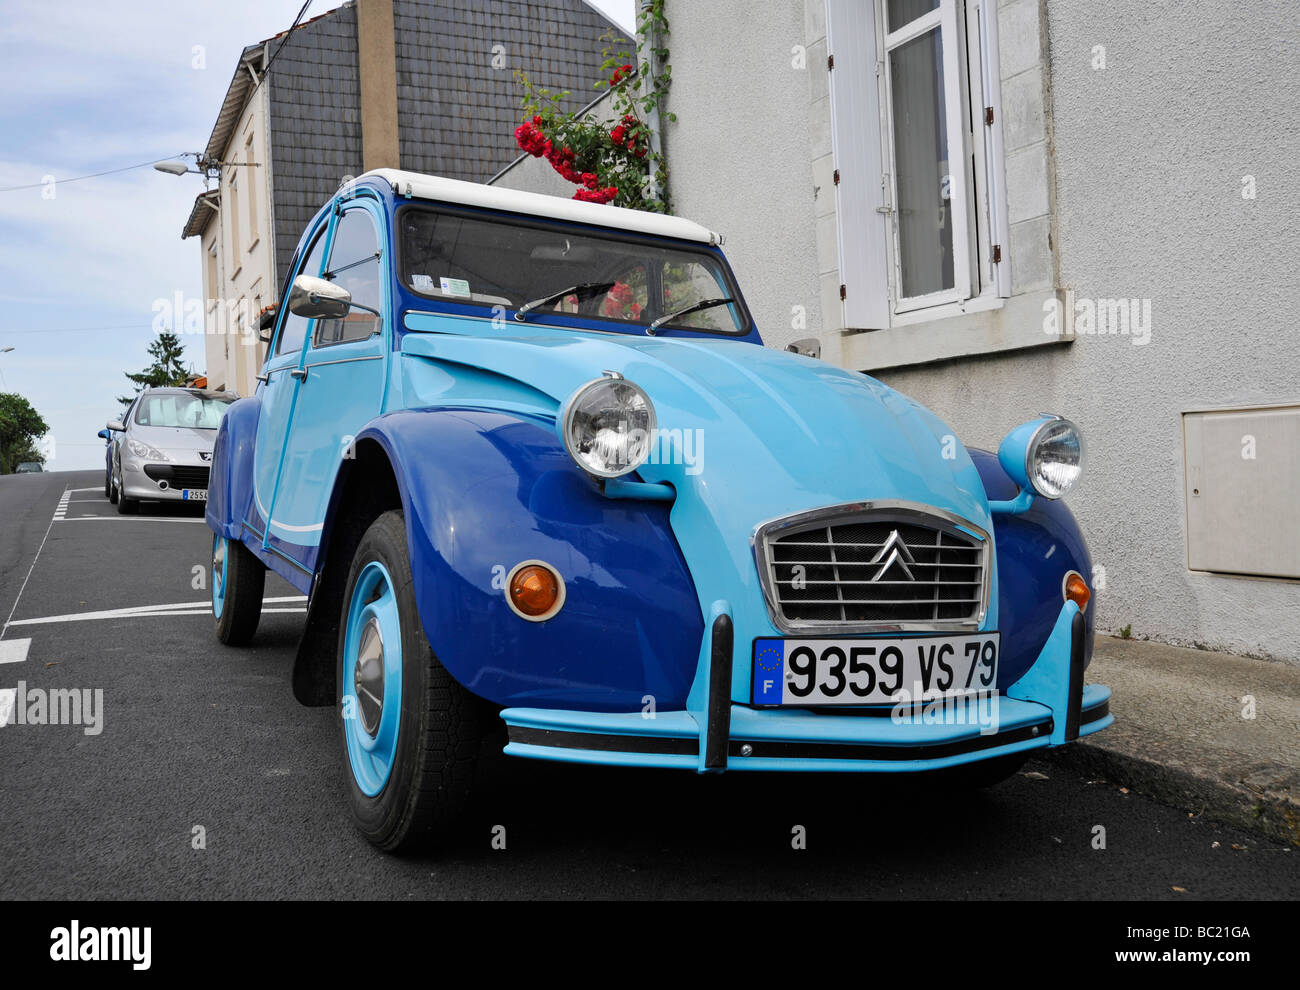 Old classic Citroen 2cv motor car parked in France Stock Photo